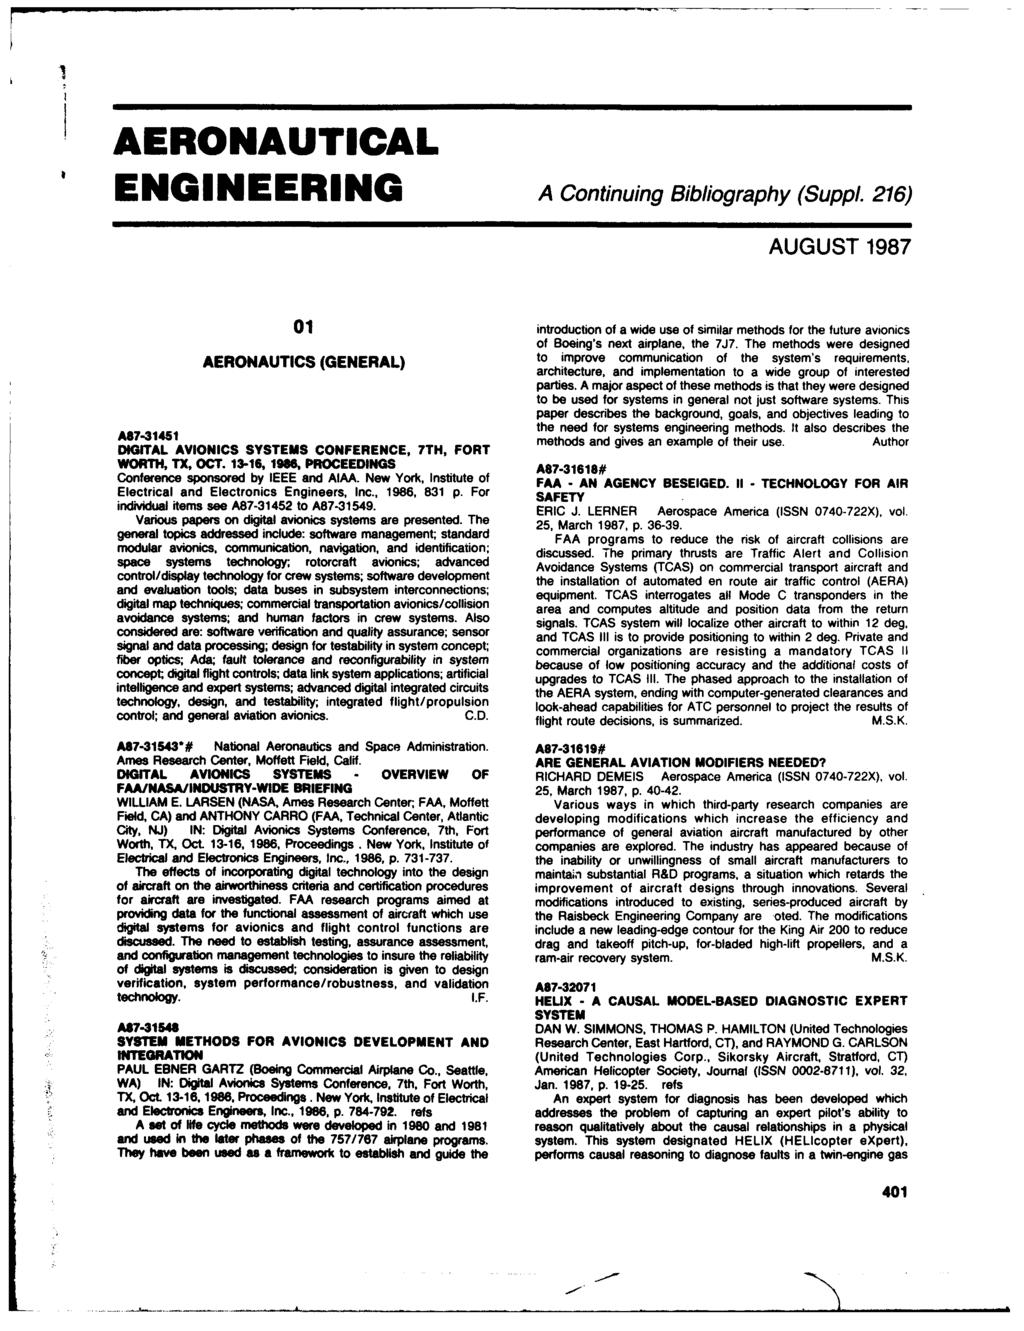 AERONAUTICAL ENGINEERING A Continuing Bibliography (Suppl. 216) AUGUST 1987 01 introduction of a wide use of similar methods for the future avionics of Boeing's next airplane, the 7J7.